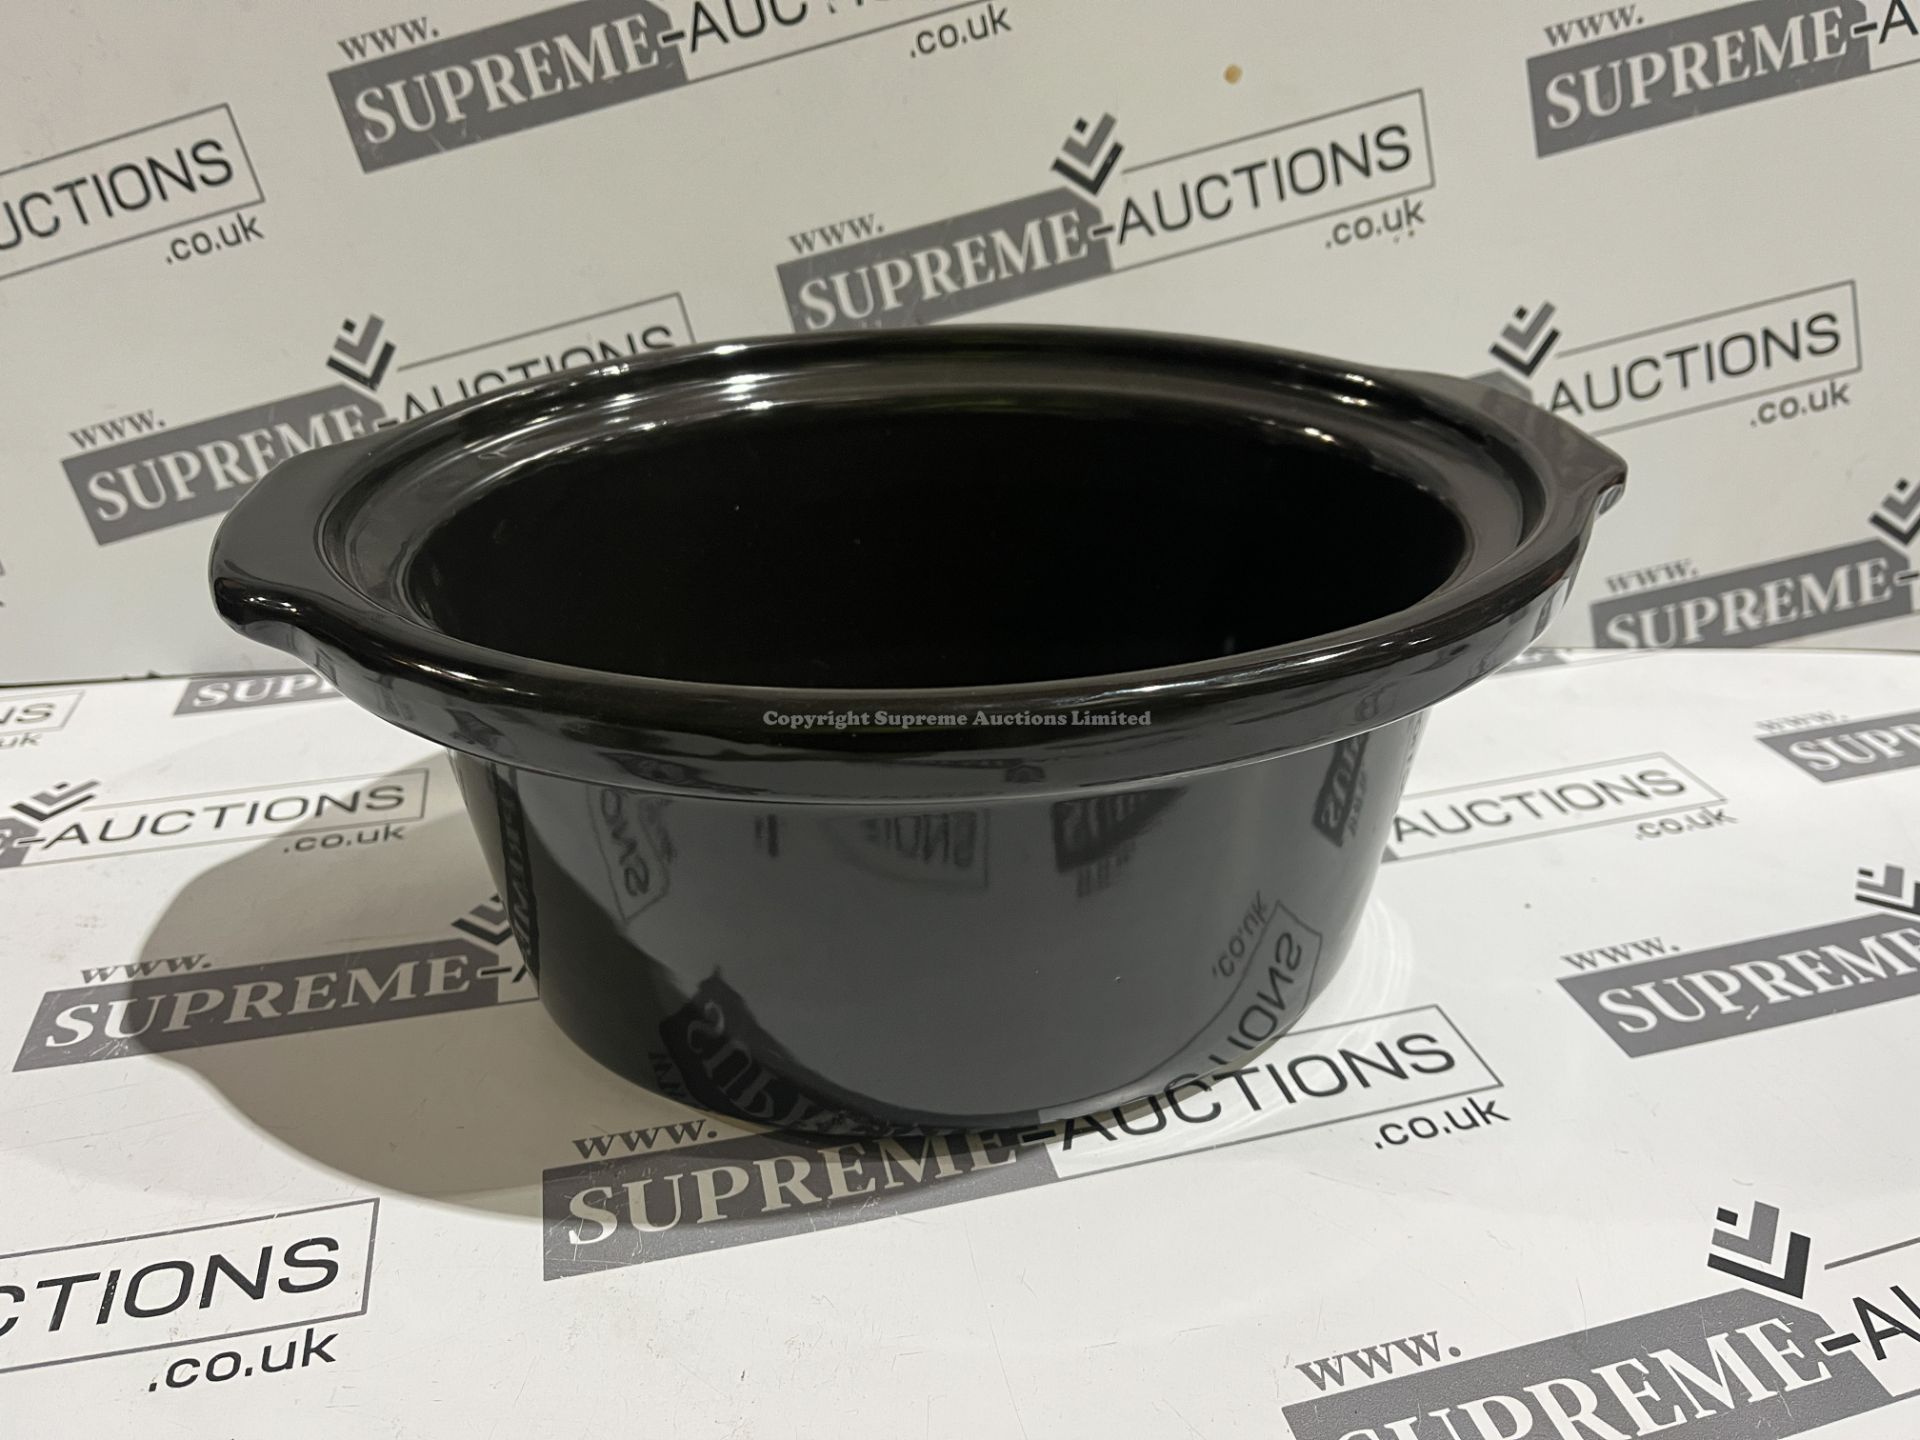 5 X BRAND NEW DEEP OVEN DISHES BLACK R9-14